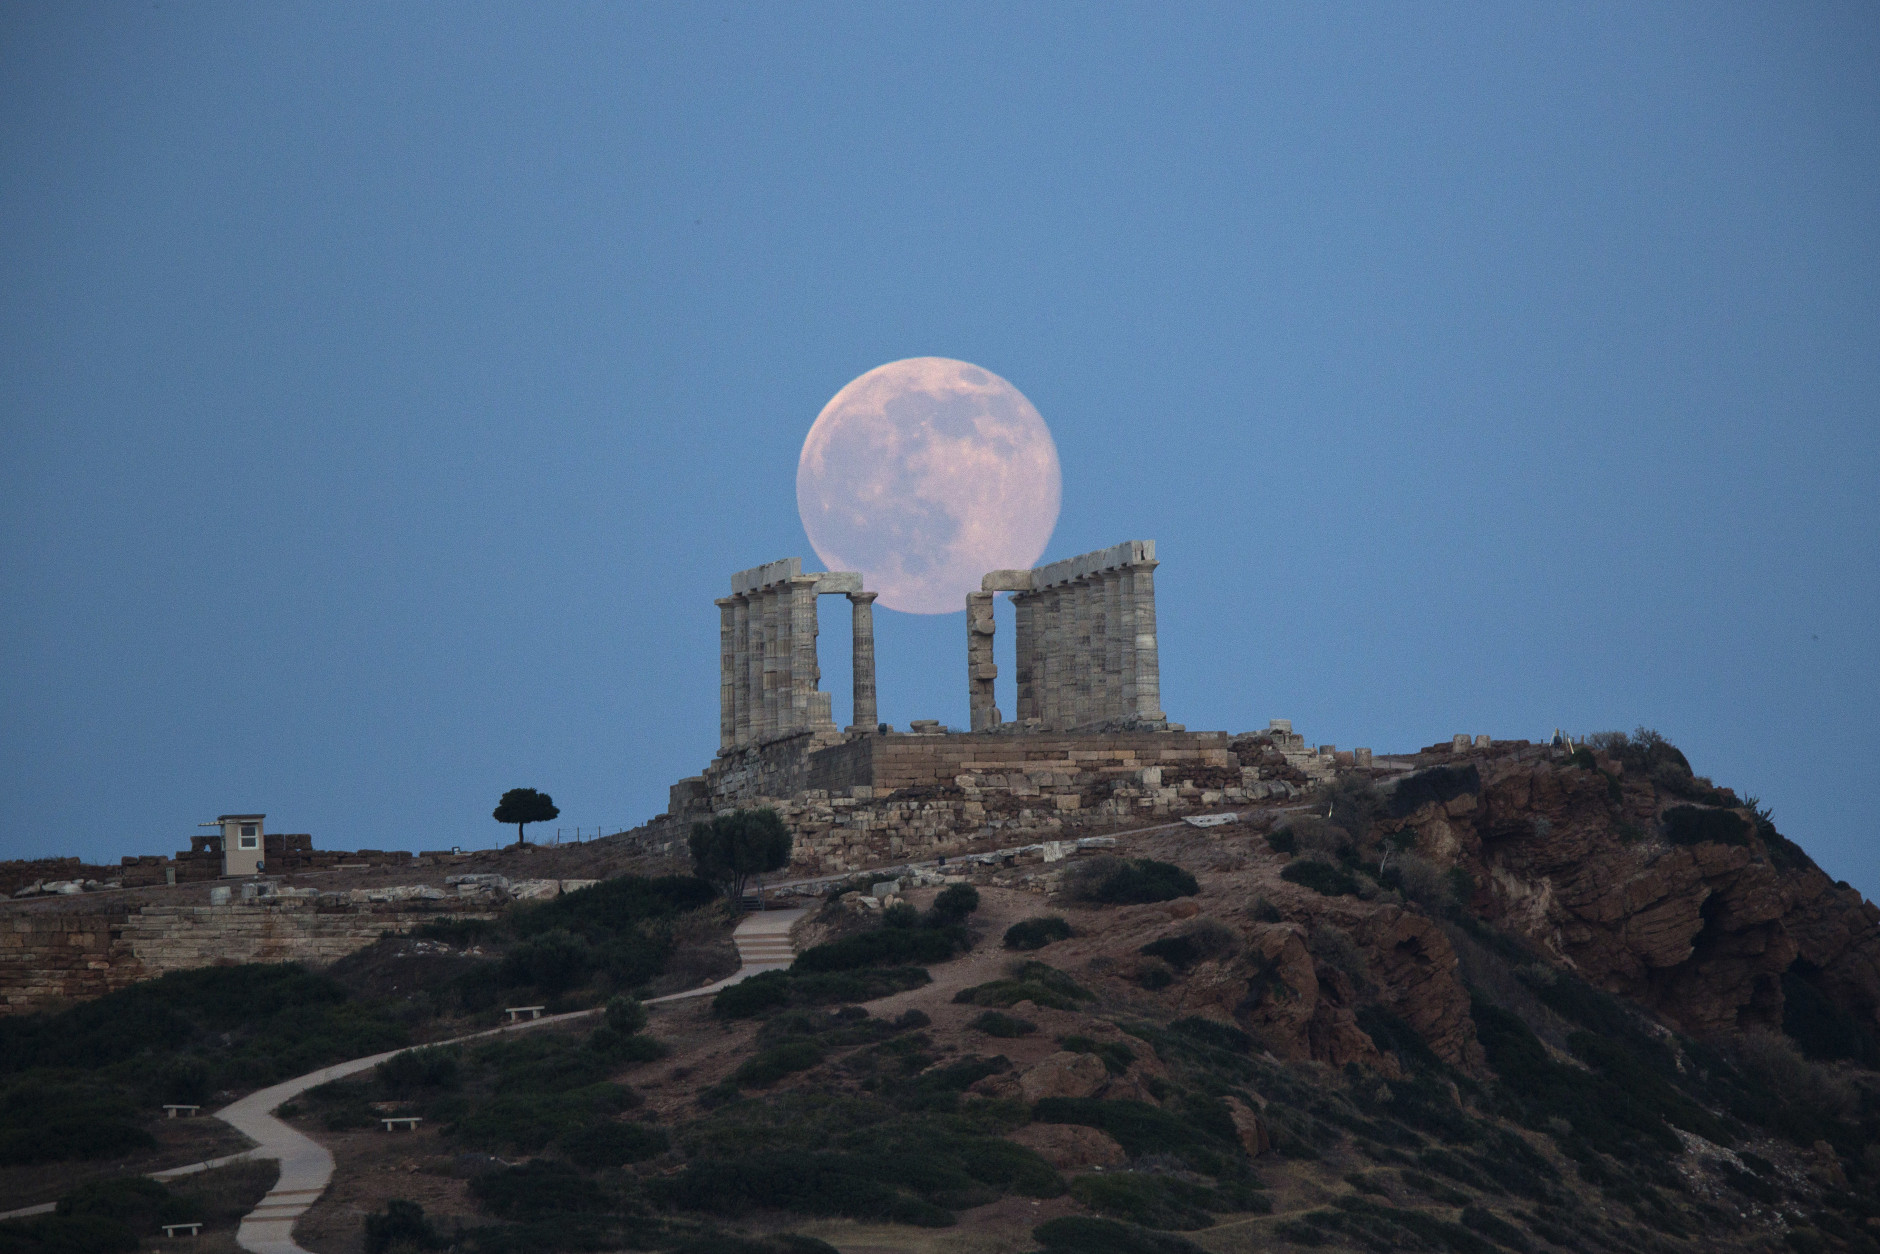 The full moon rises behind the columns of the ancient marble Temple of Poseidon at Cape Sounion, southeast of Athens, on the eve of the summer solstice on June 20, 2016.  The temple located on a promontory at Cape Sounion,  about 70 Km (45 miles) south-southeast of Athens, built 444 BC, and dedicated to Poseidon, god of the sea. (AP Photo/Petros Giannakouris)